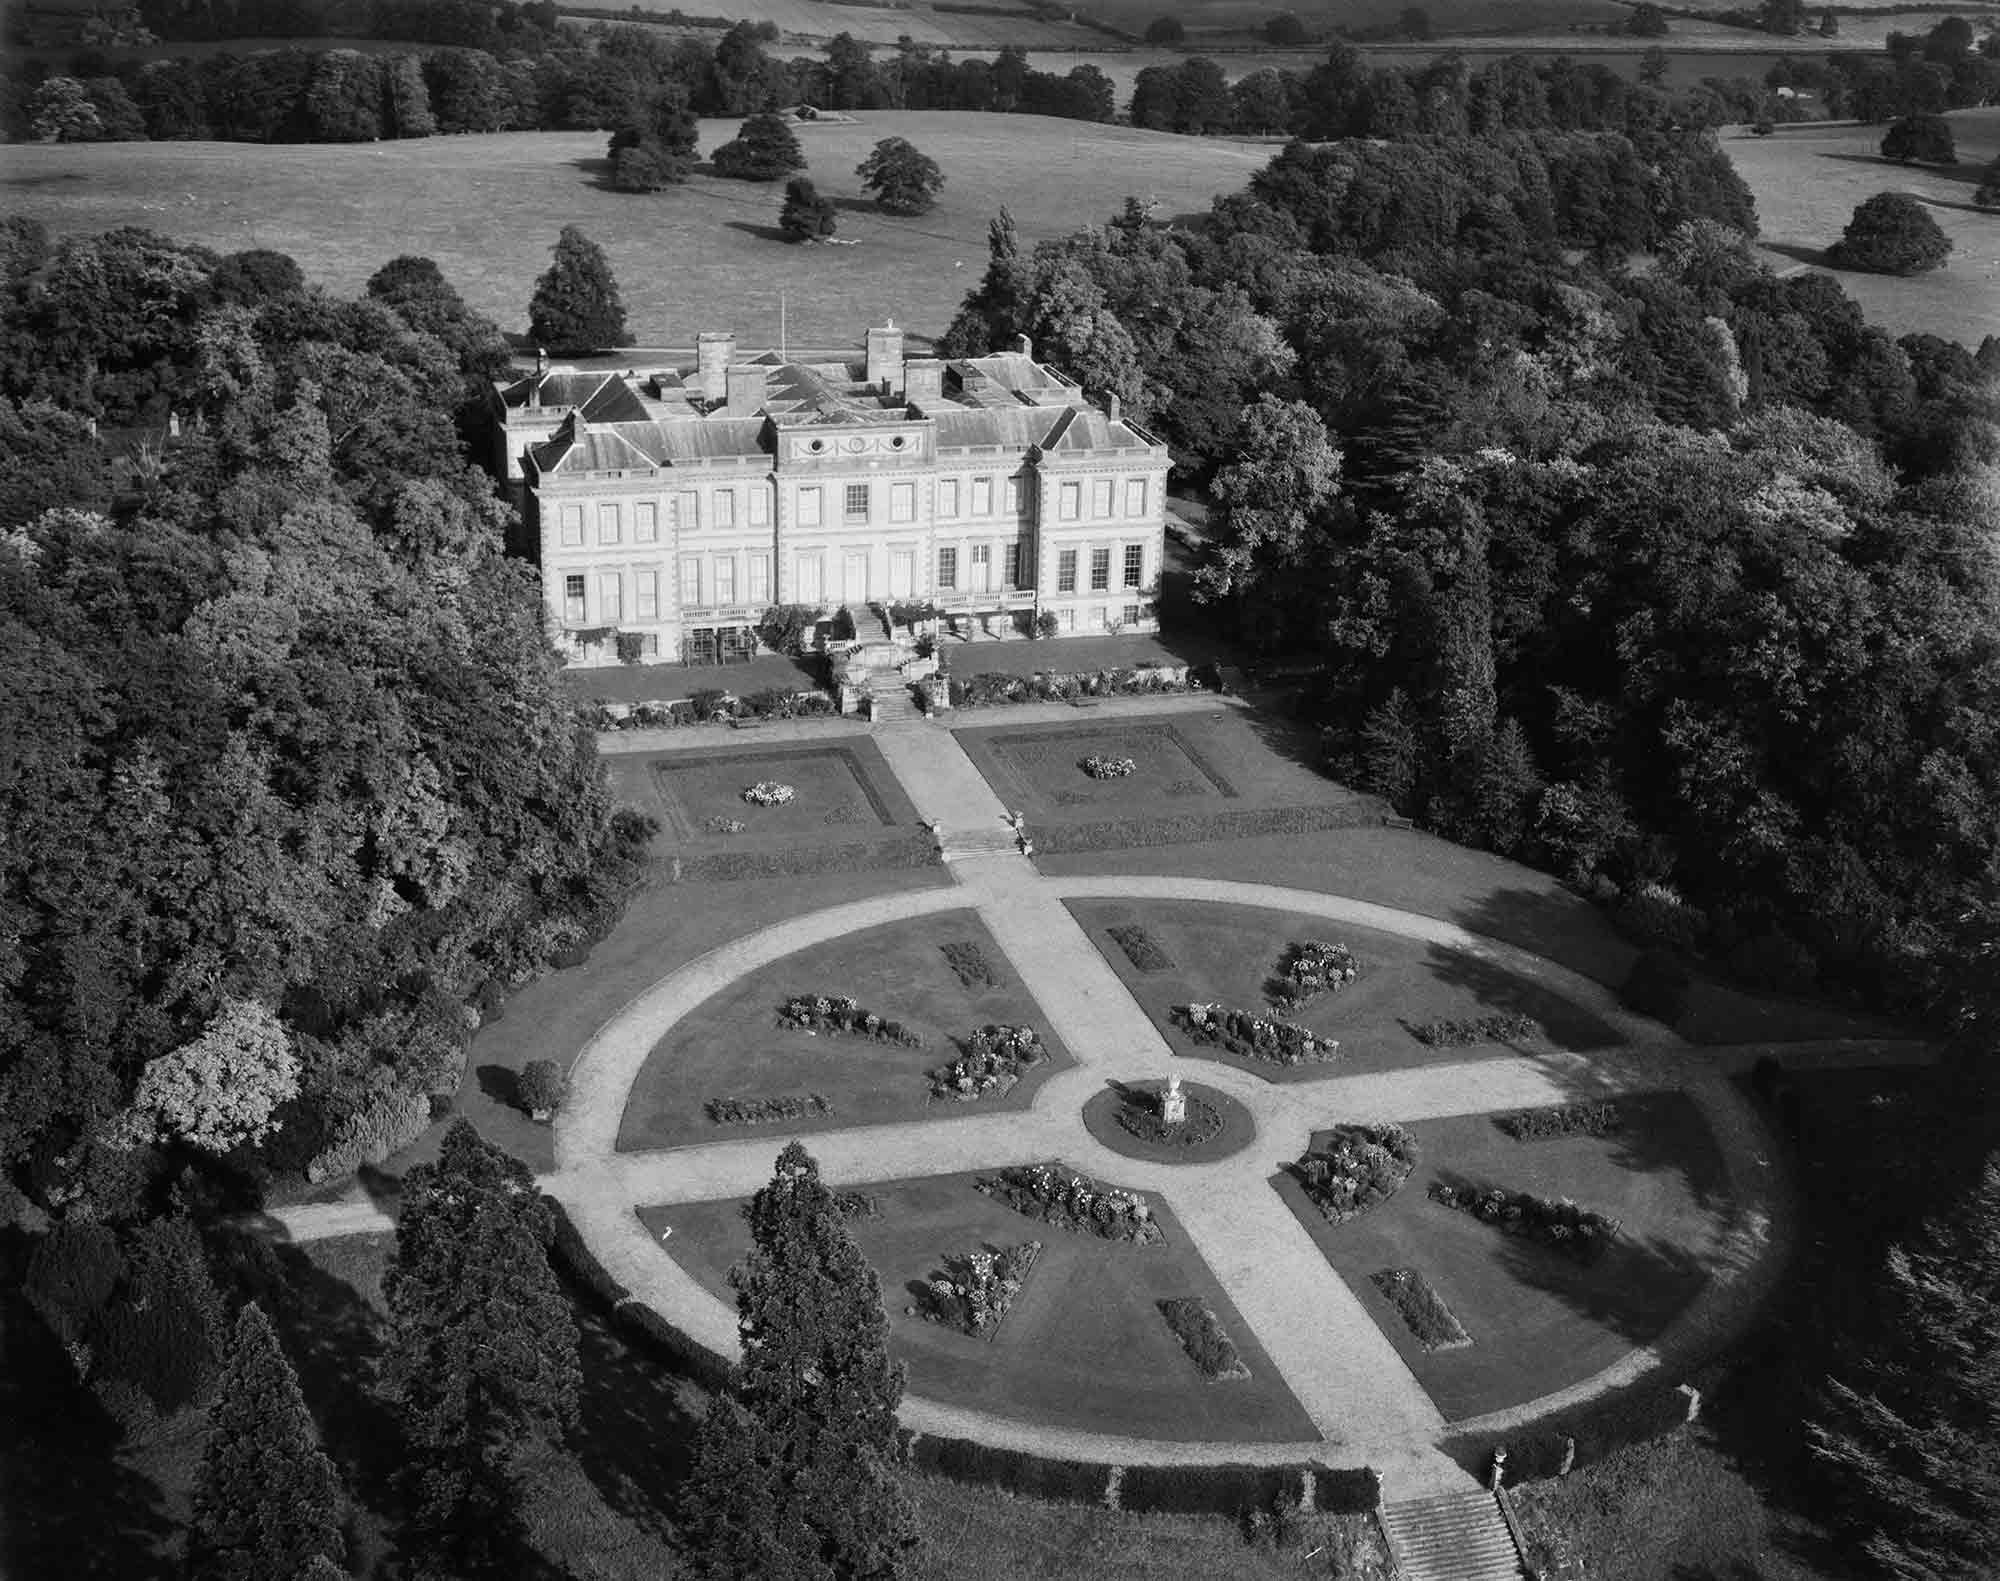 Black and white oblique aerial photograph taken at low altitude. The view shows the garden front of a large country house with parkland and trees beyond. The bulk of the photograph shows a formal garden arrangement, comprising two terraces, the second with sunken lawns divided by a gravel path that extends towards a rose garden enclosed by a circular walk and divided into four segments by cruciform gravel walks. Dense clusters of trees flank the house and surround the gardens.